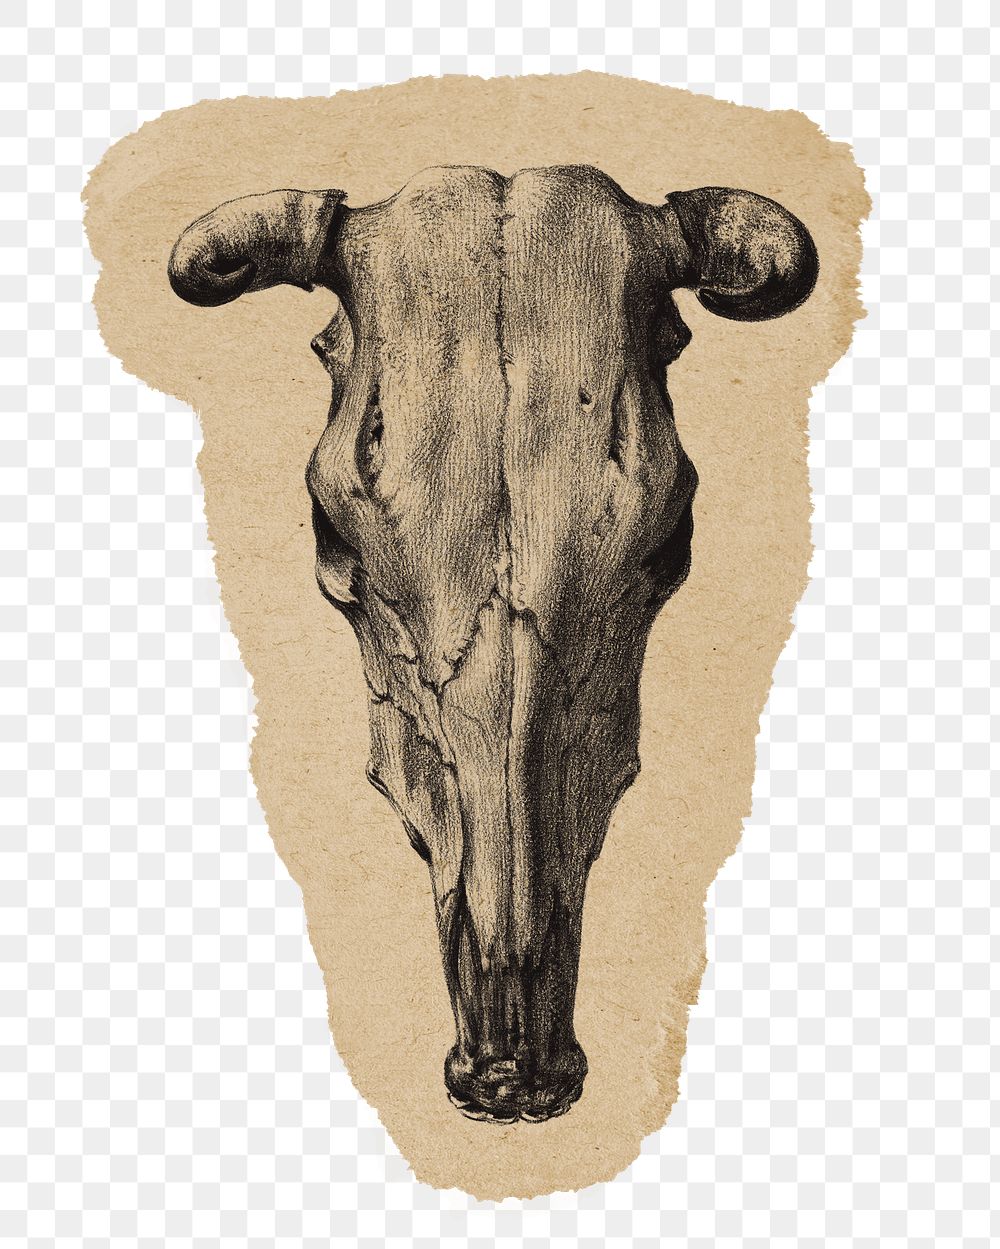 Png Skull of a cow sticker, vintage illustration on ripped paper, transparent background